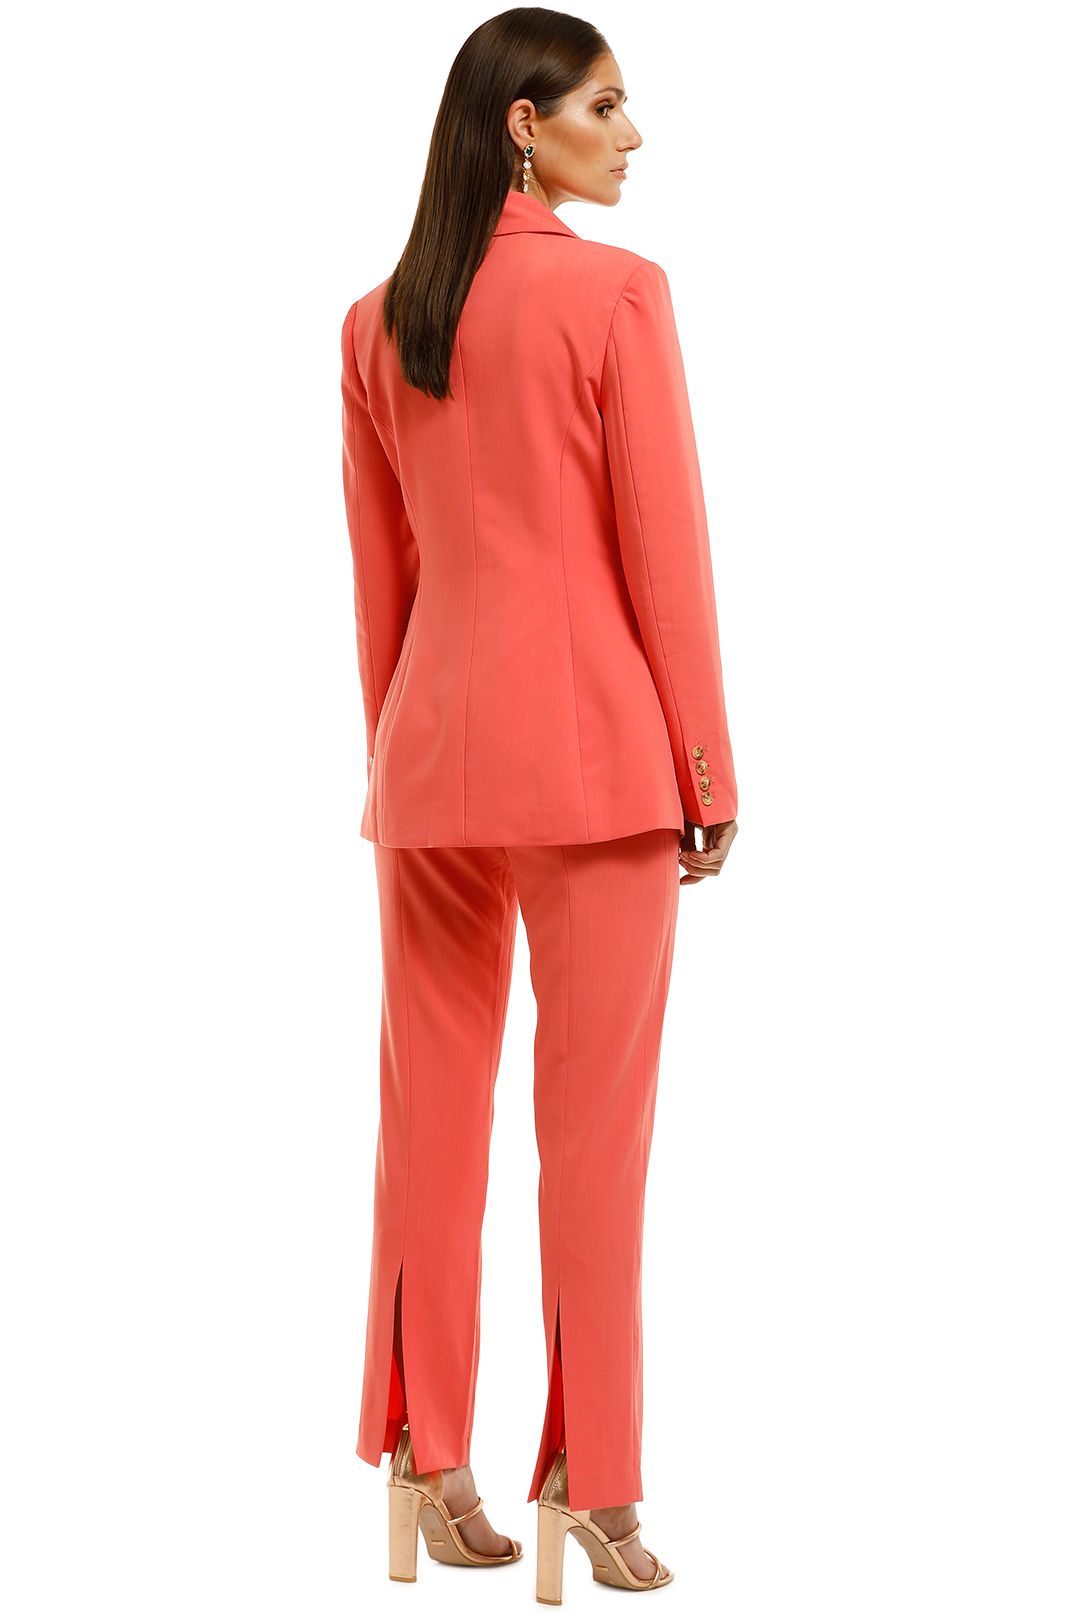 CMEO-Collective-Narrated-Blazer-and-Pant-Set-Watermelon-Back